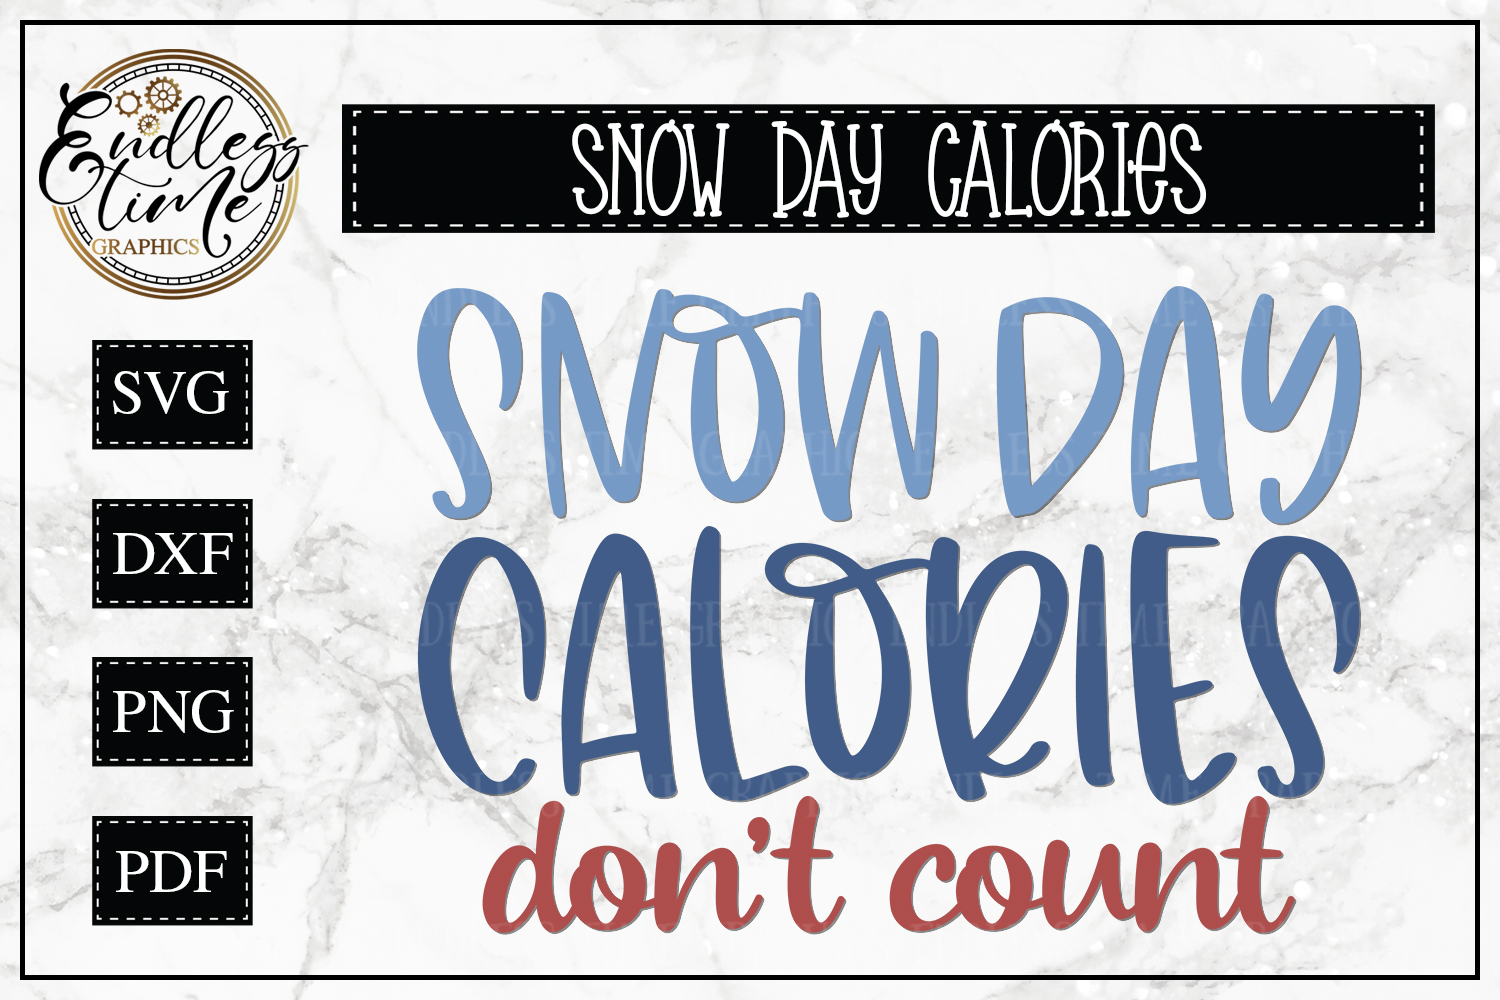 Download Snow Day Calories Don't Count - A Funny SnowDay SVG